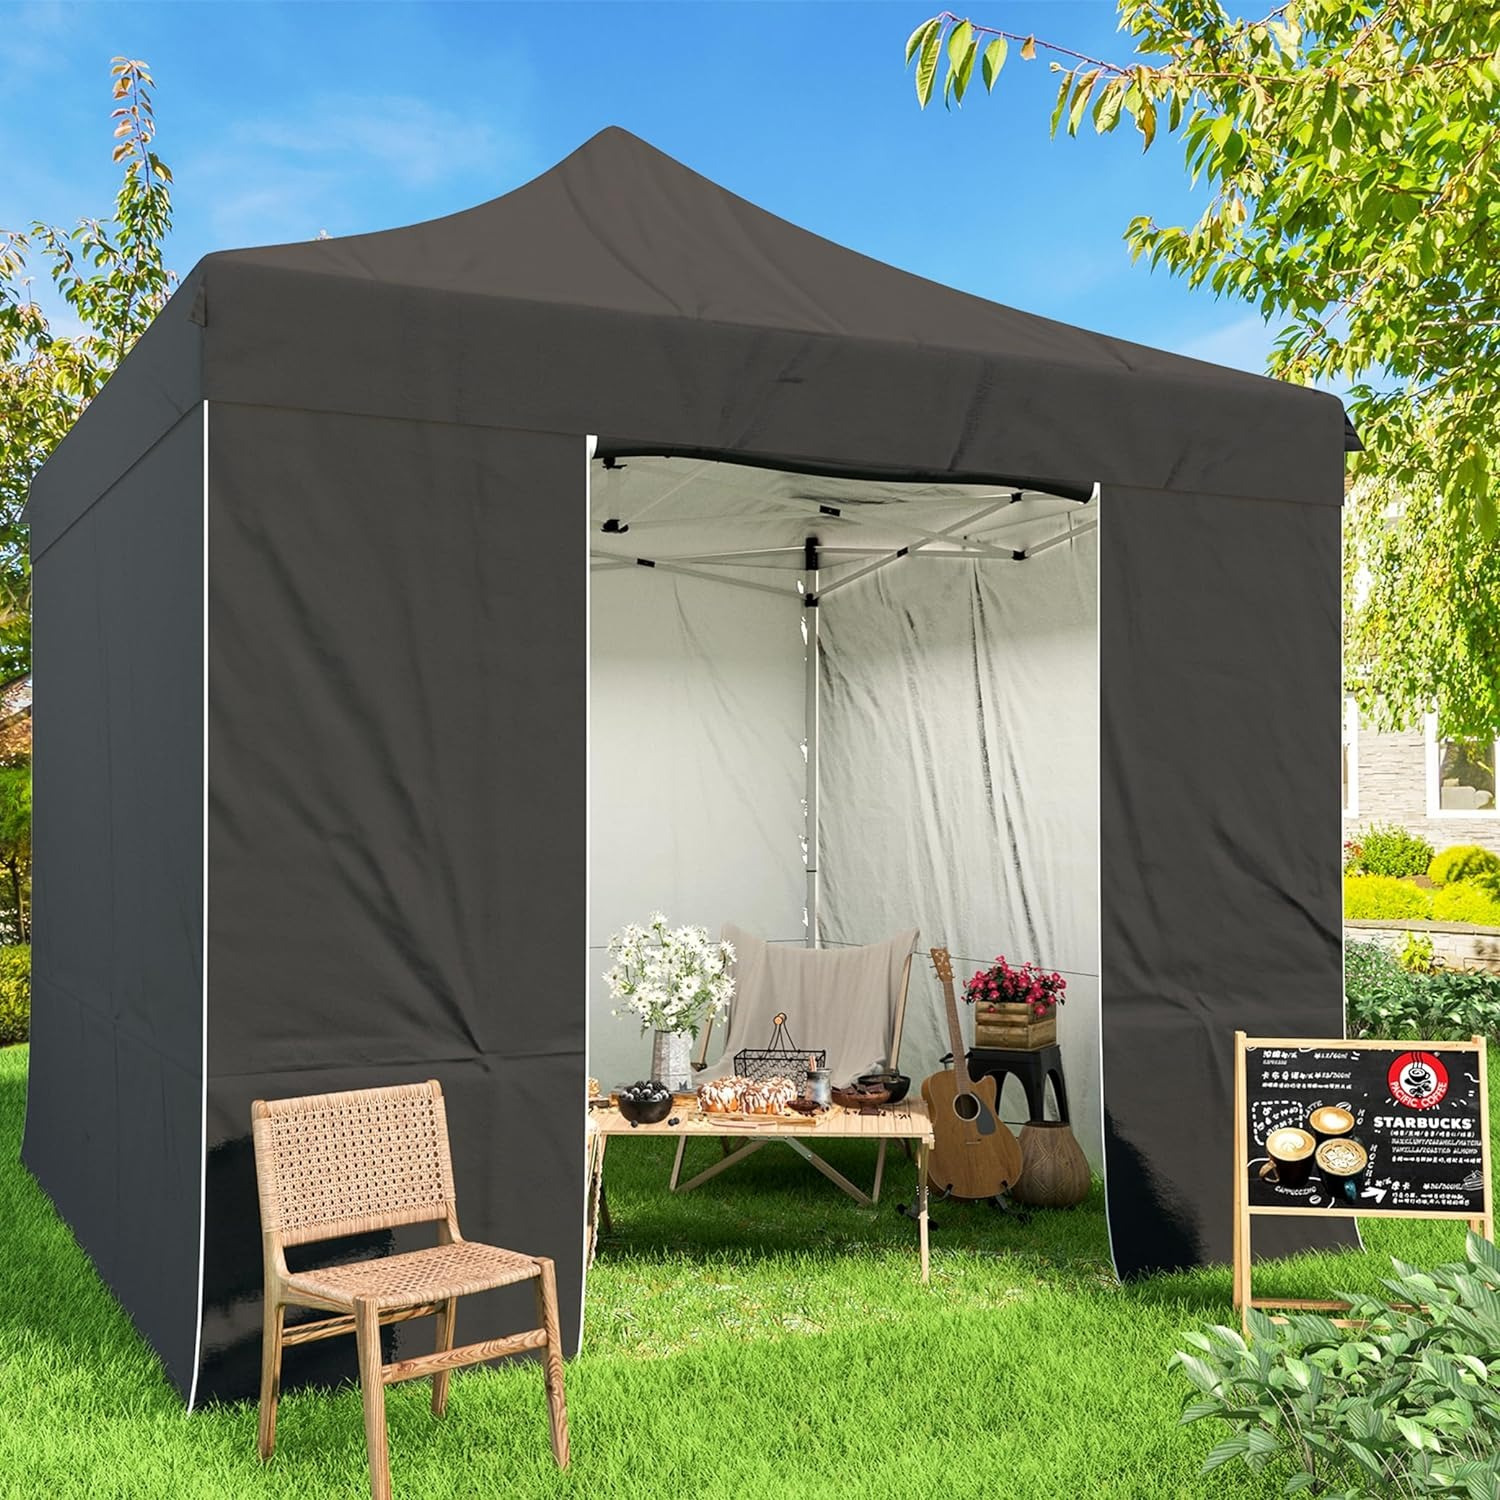 

Pop Up Canopy Tent 10x10ft Instant Gazebo Shade Canopies W/4 Removable Sidewall, Waterproof Commercial Outdoor Canopie For Party Exhibition Picnic W/upgrade Roller Bag & 4 Weight Bags